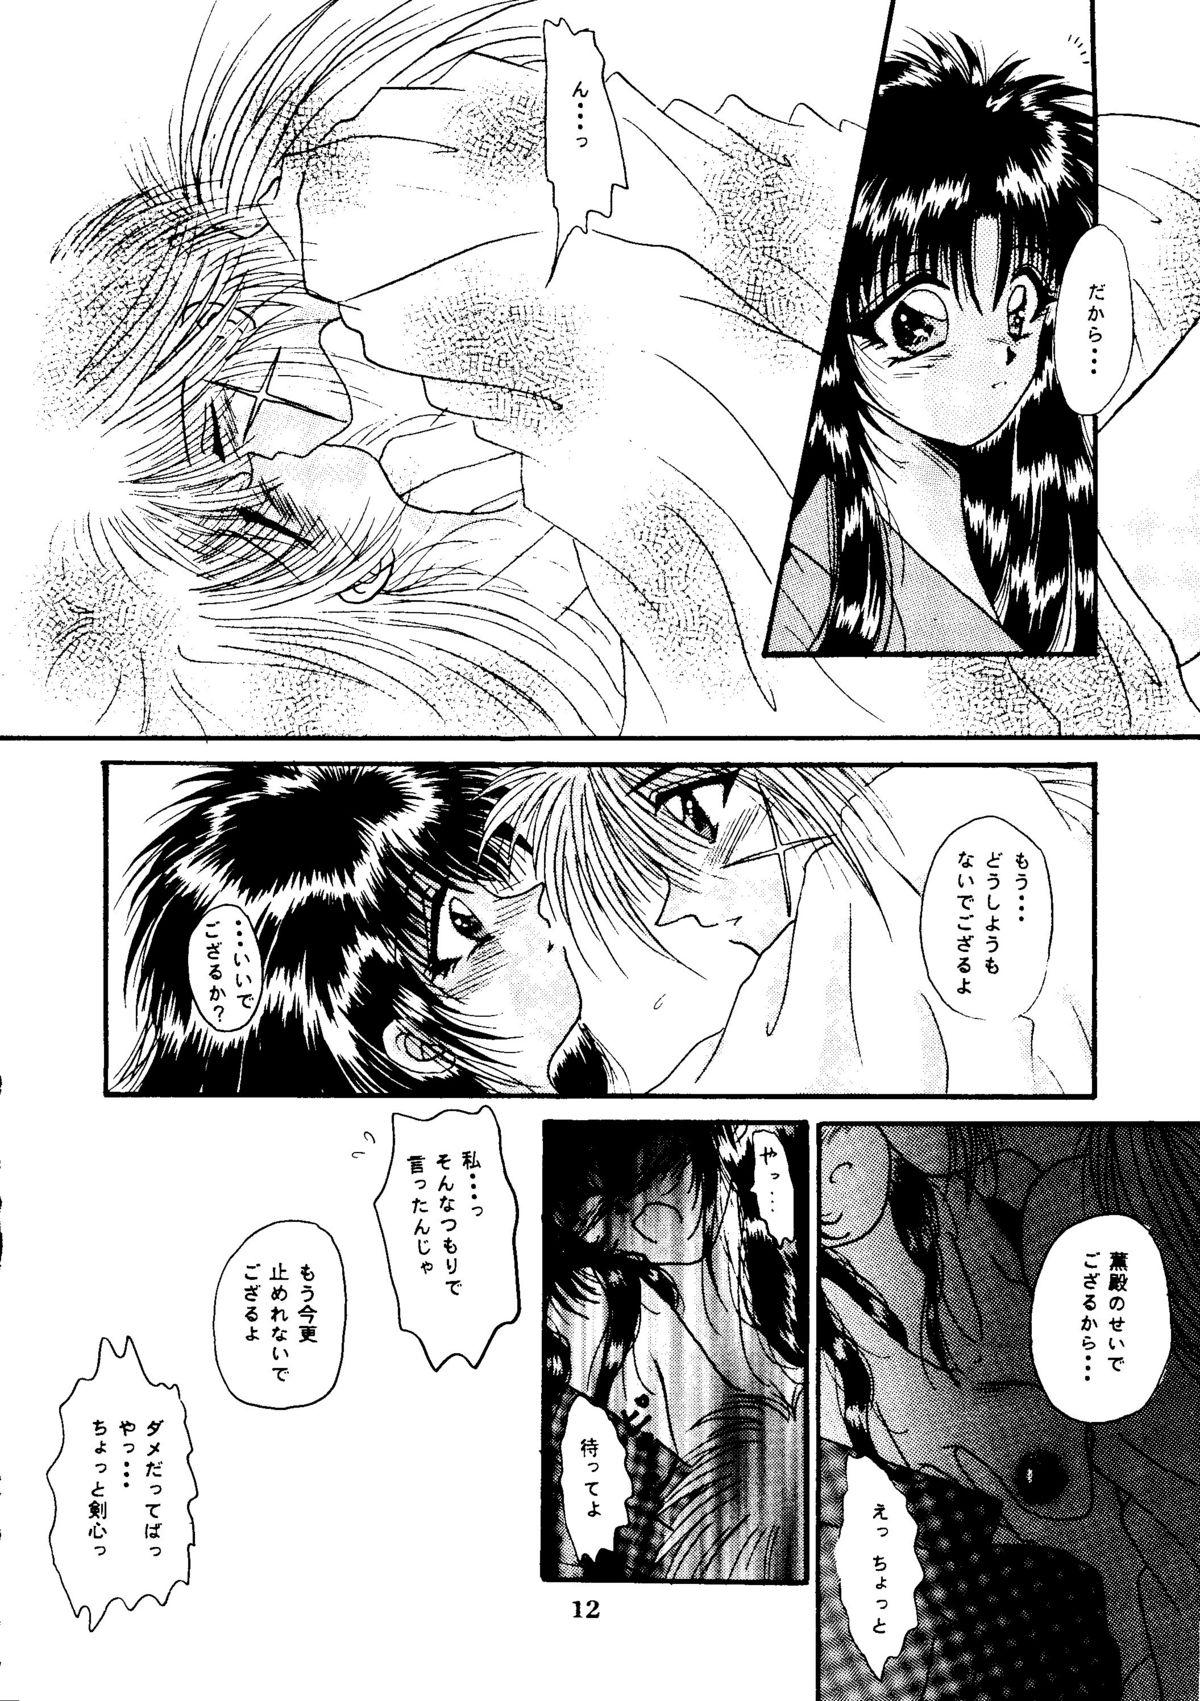 Camgirl I Believe... - Rurouni kenshin Gay 3some - Page 11